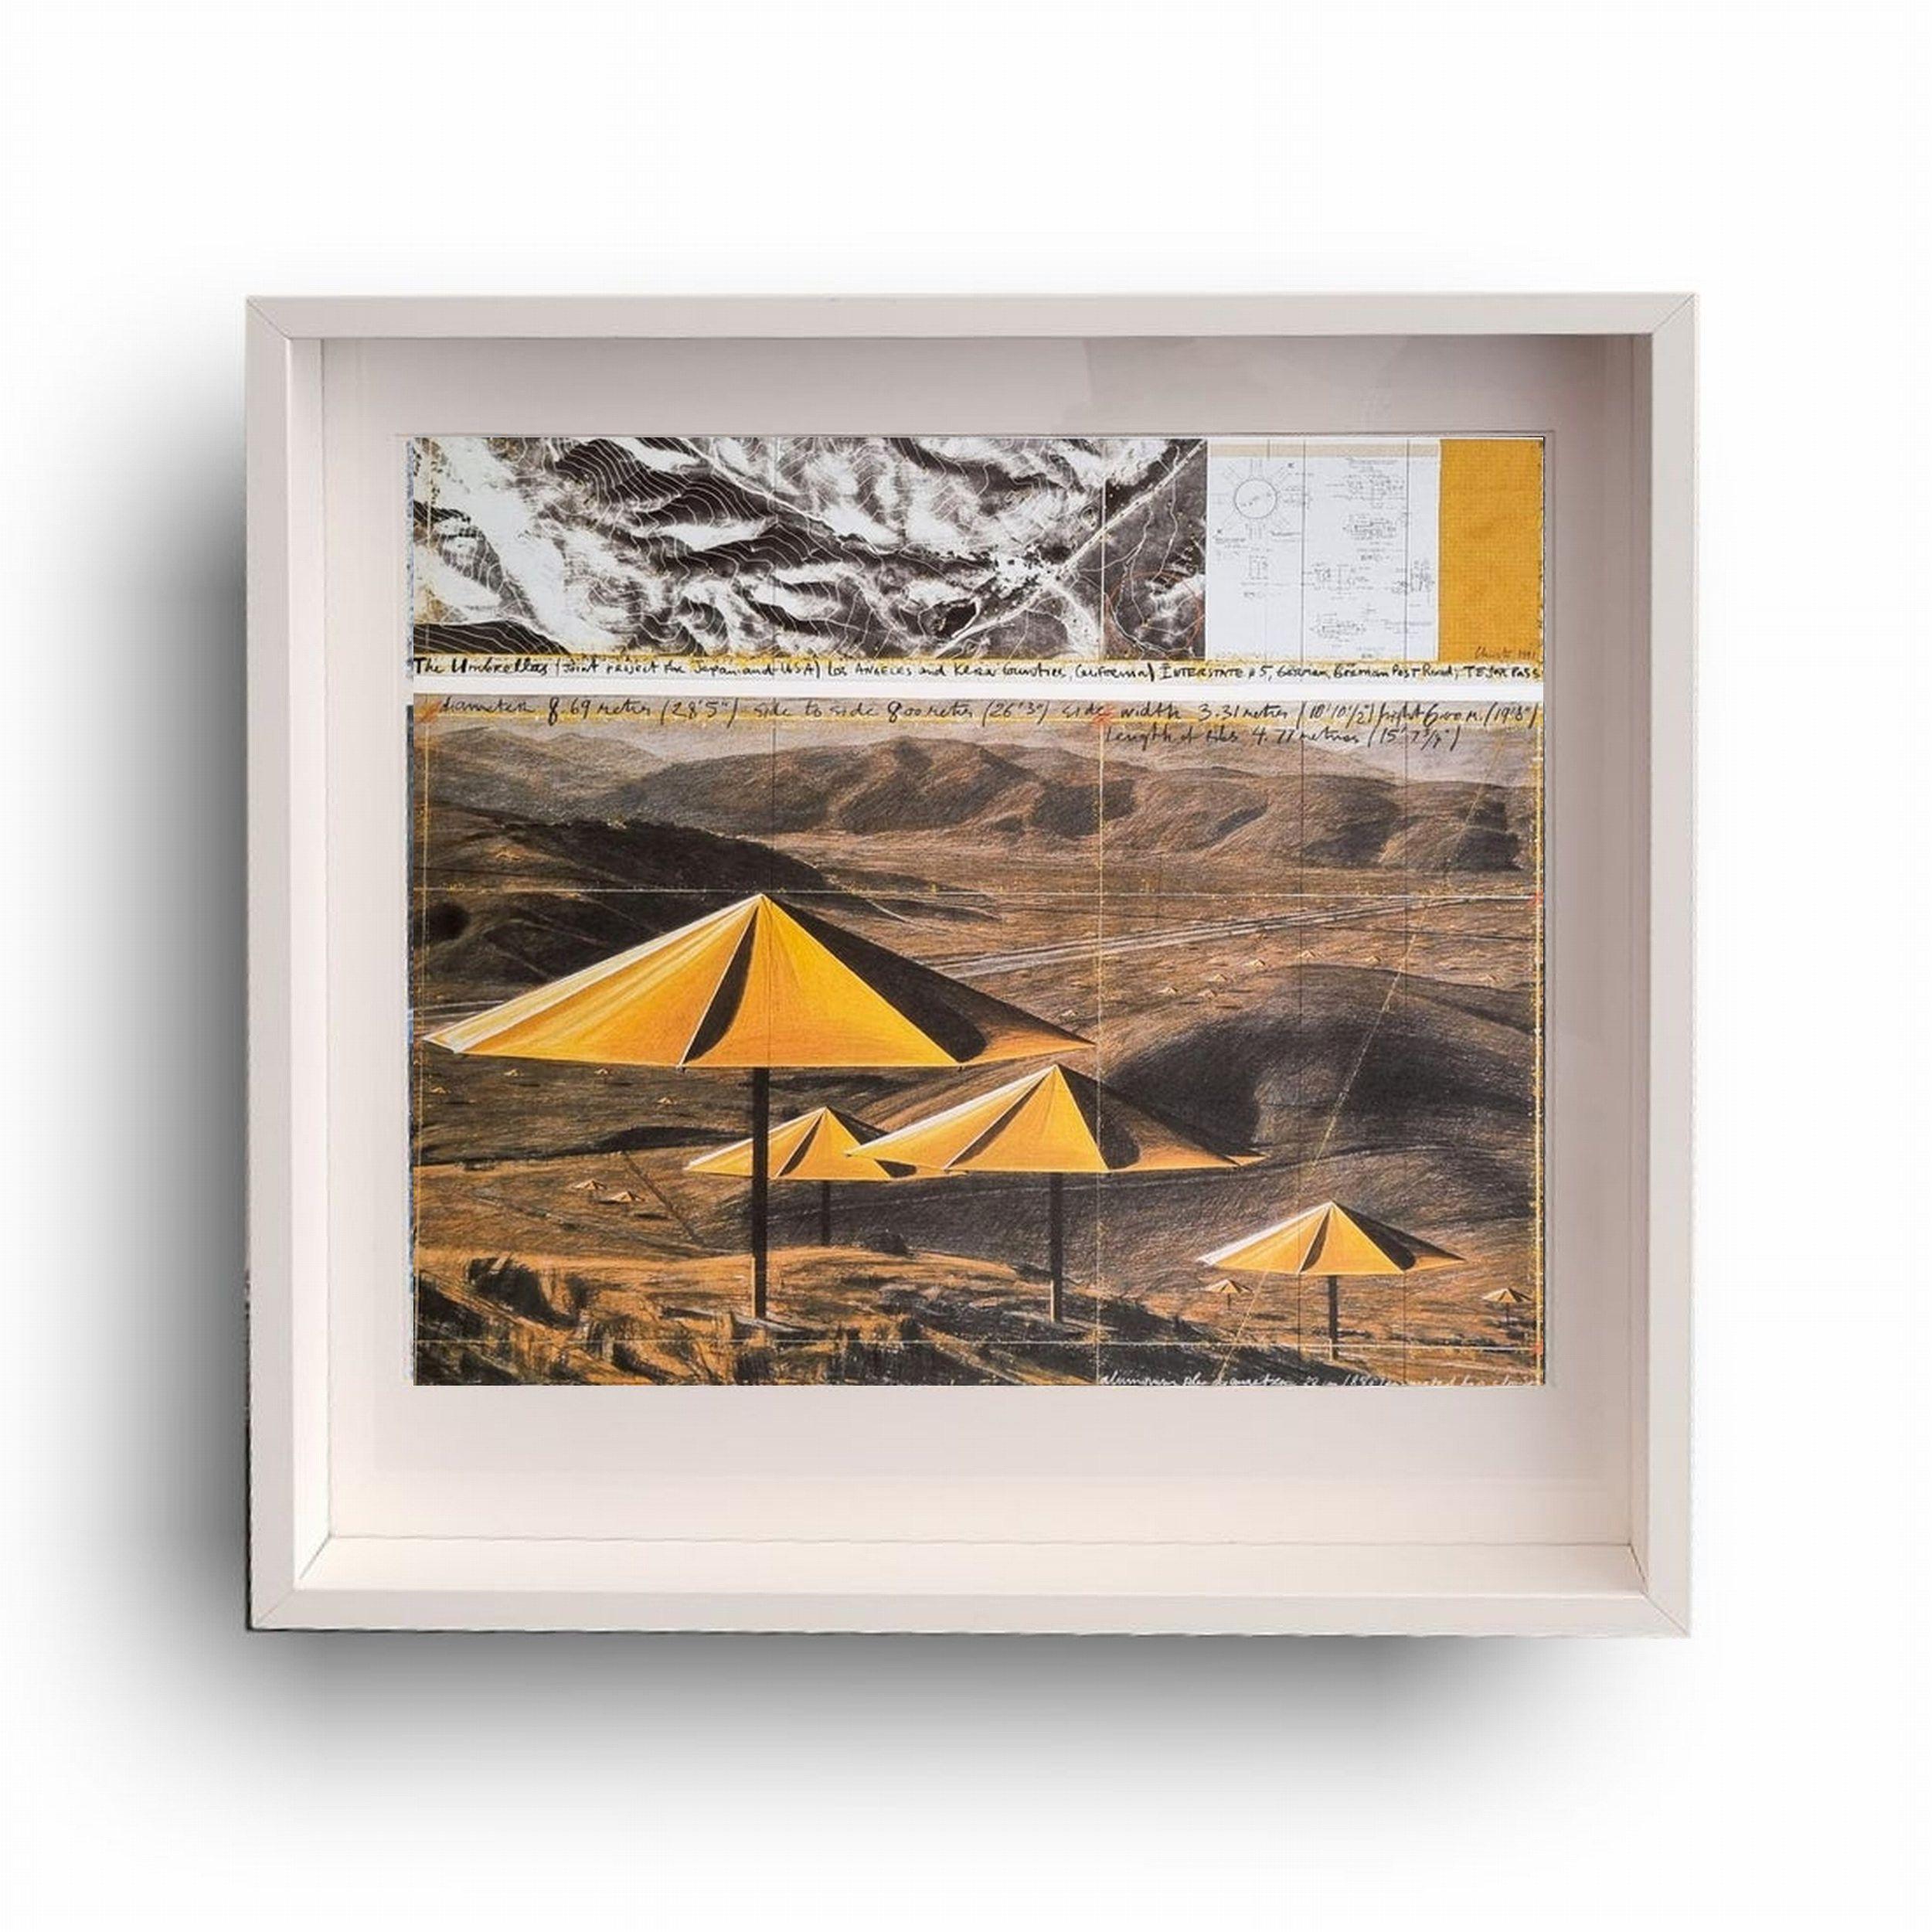 The Umbrellas (Yellow & Blue  FRAMED) - Modern Print by Christo and Jeanne-Claude